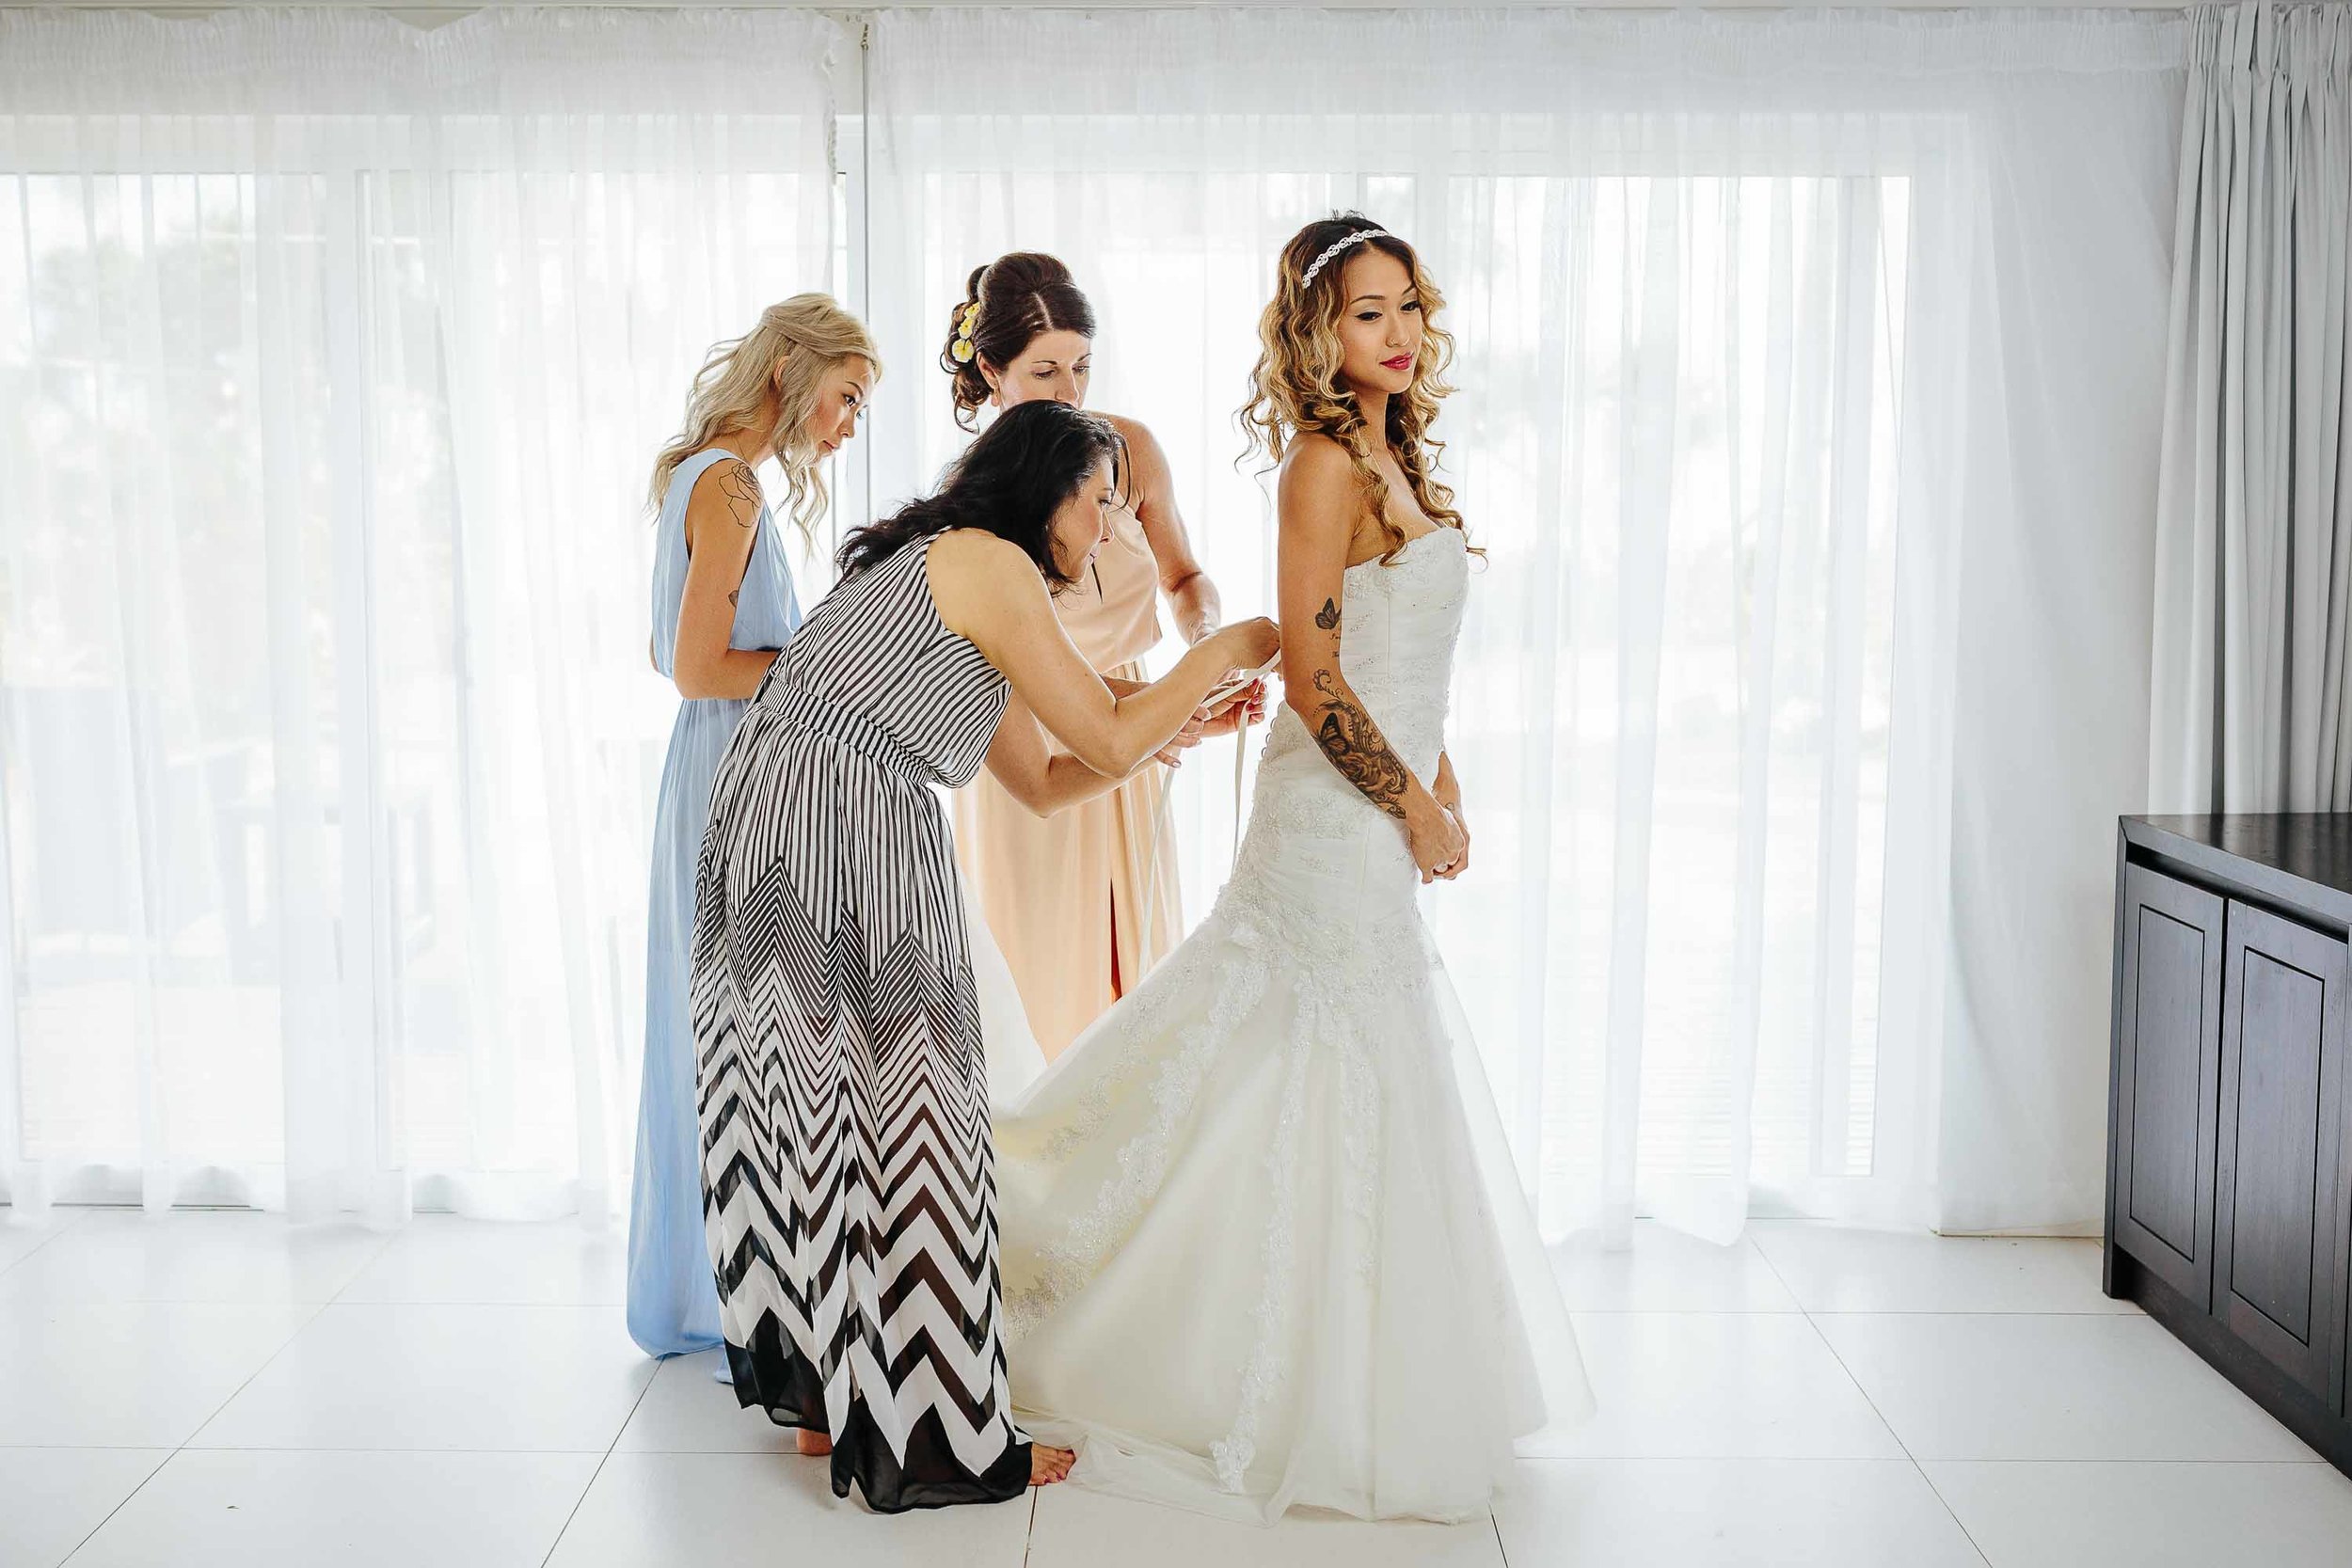 Mother of bride and friends helping bride with wedding dress